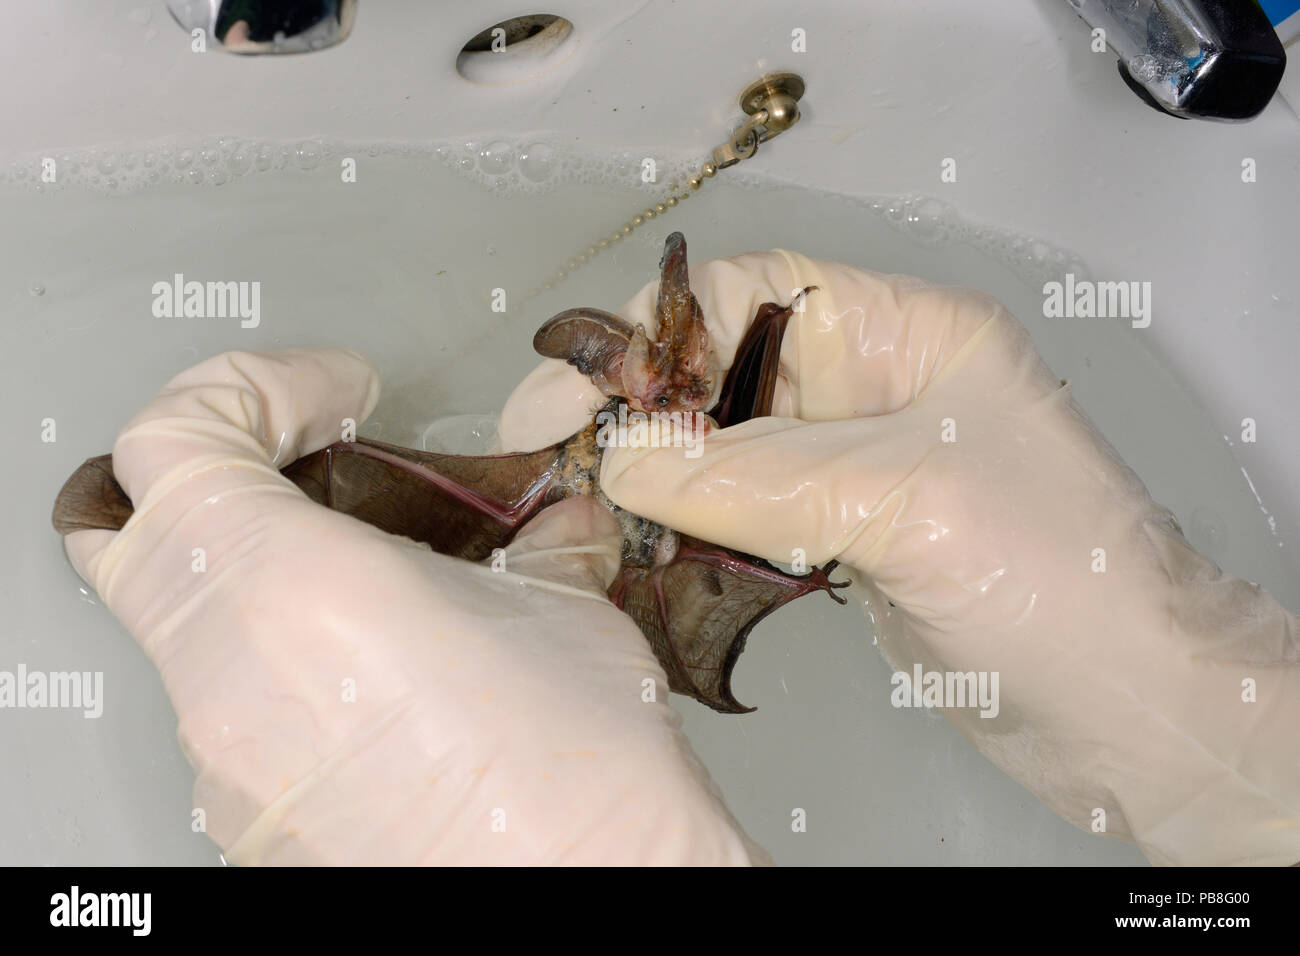 Samantha Pickering carefully washing a Brown long-eared bat (Plecotus auritus) after peeling off the flypaper it was stuck to, Barnstaple, Devon, UK, October 2015. Model released. Stock Photo